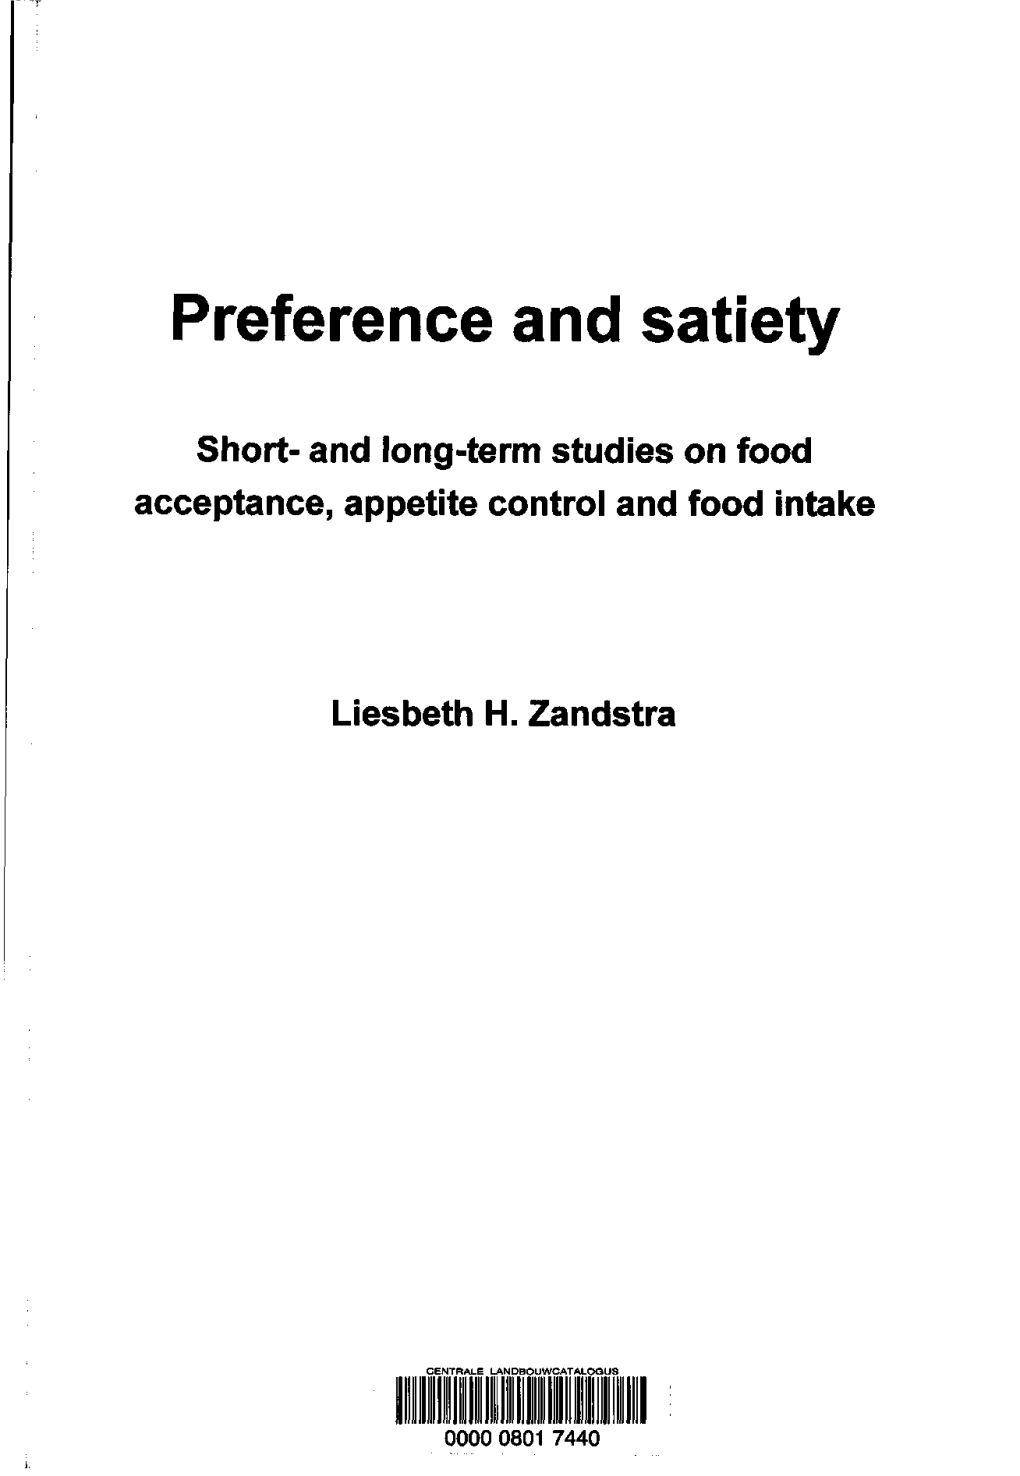 Preference and Satiety